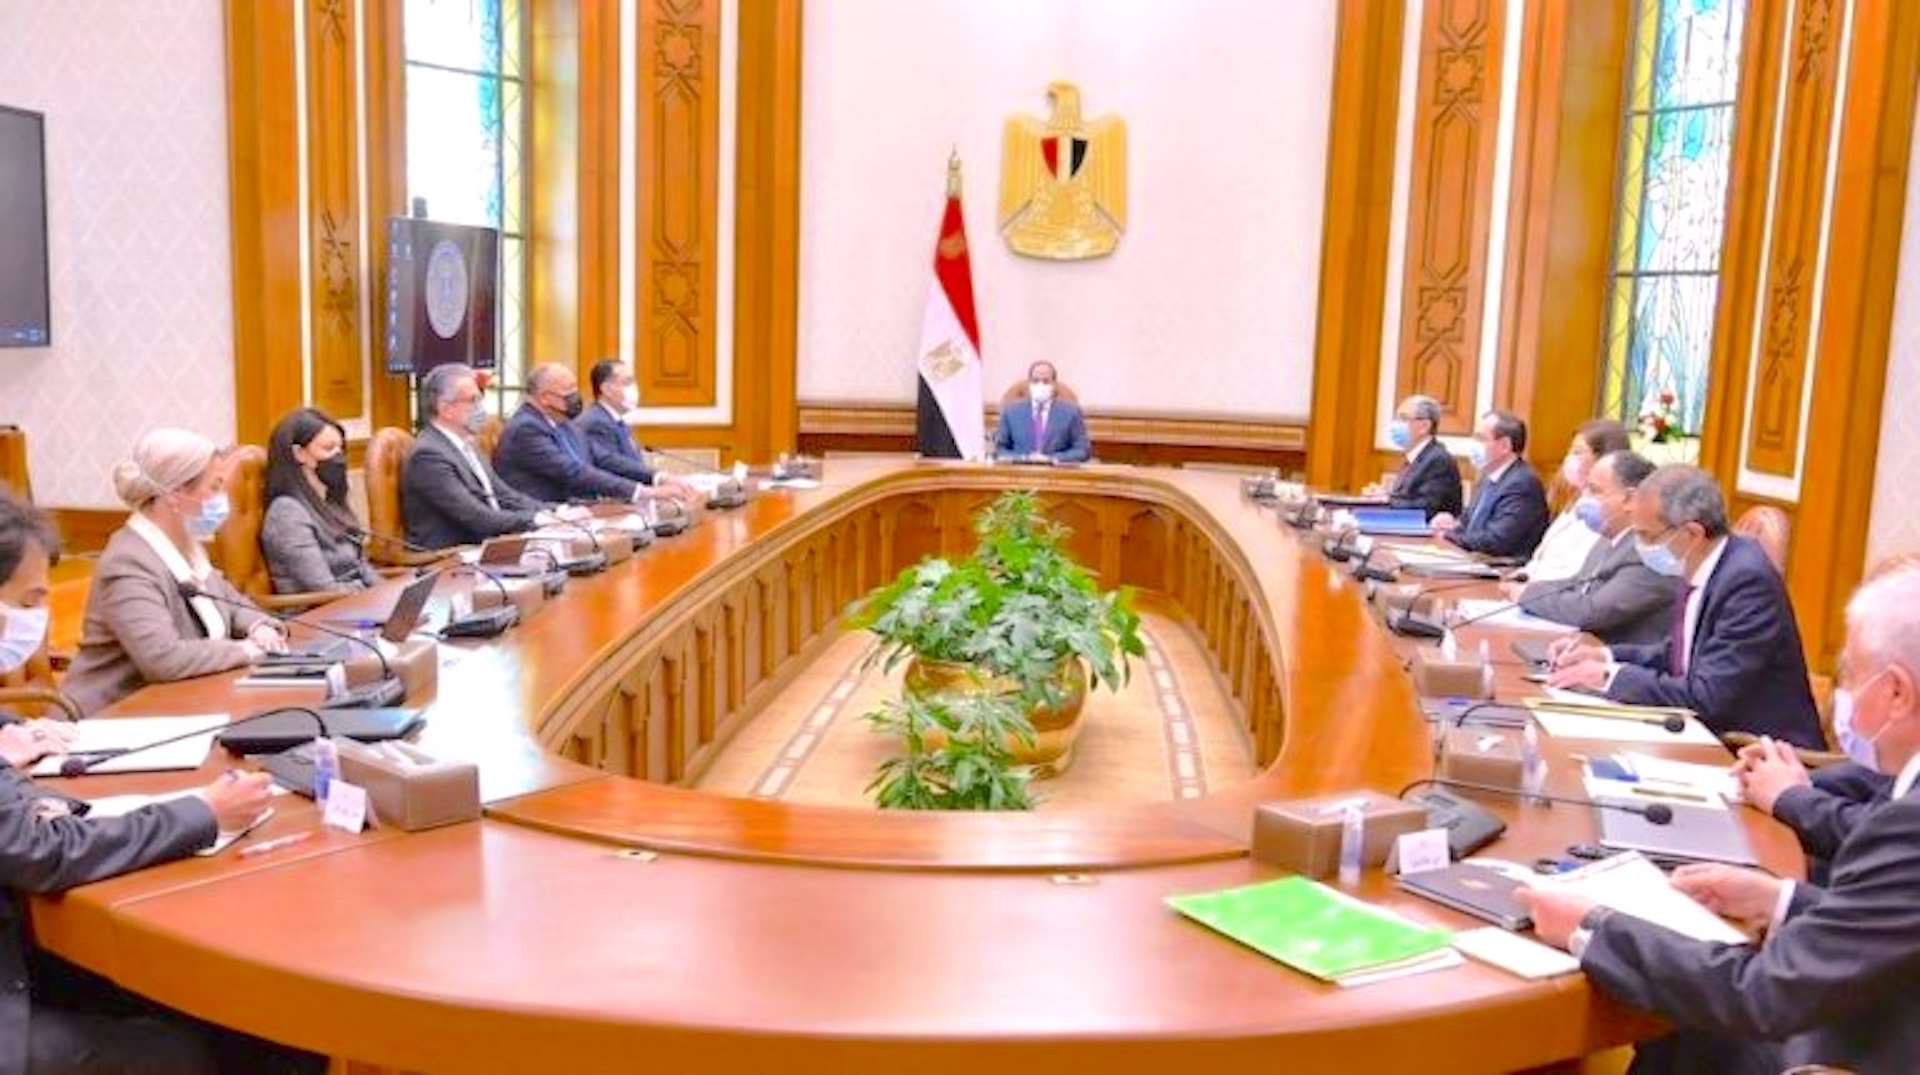 President Sisi reviews preparations for Egypt’s hosting of COP 27